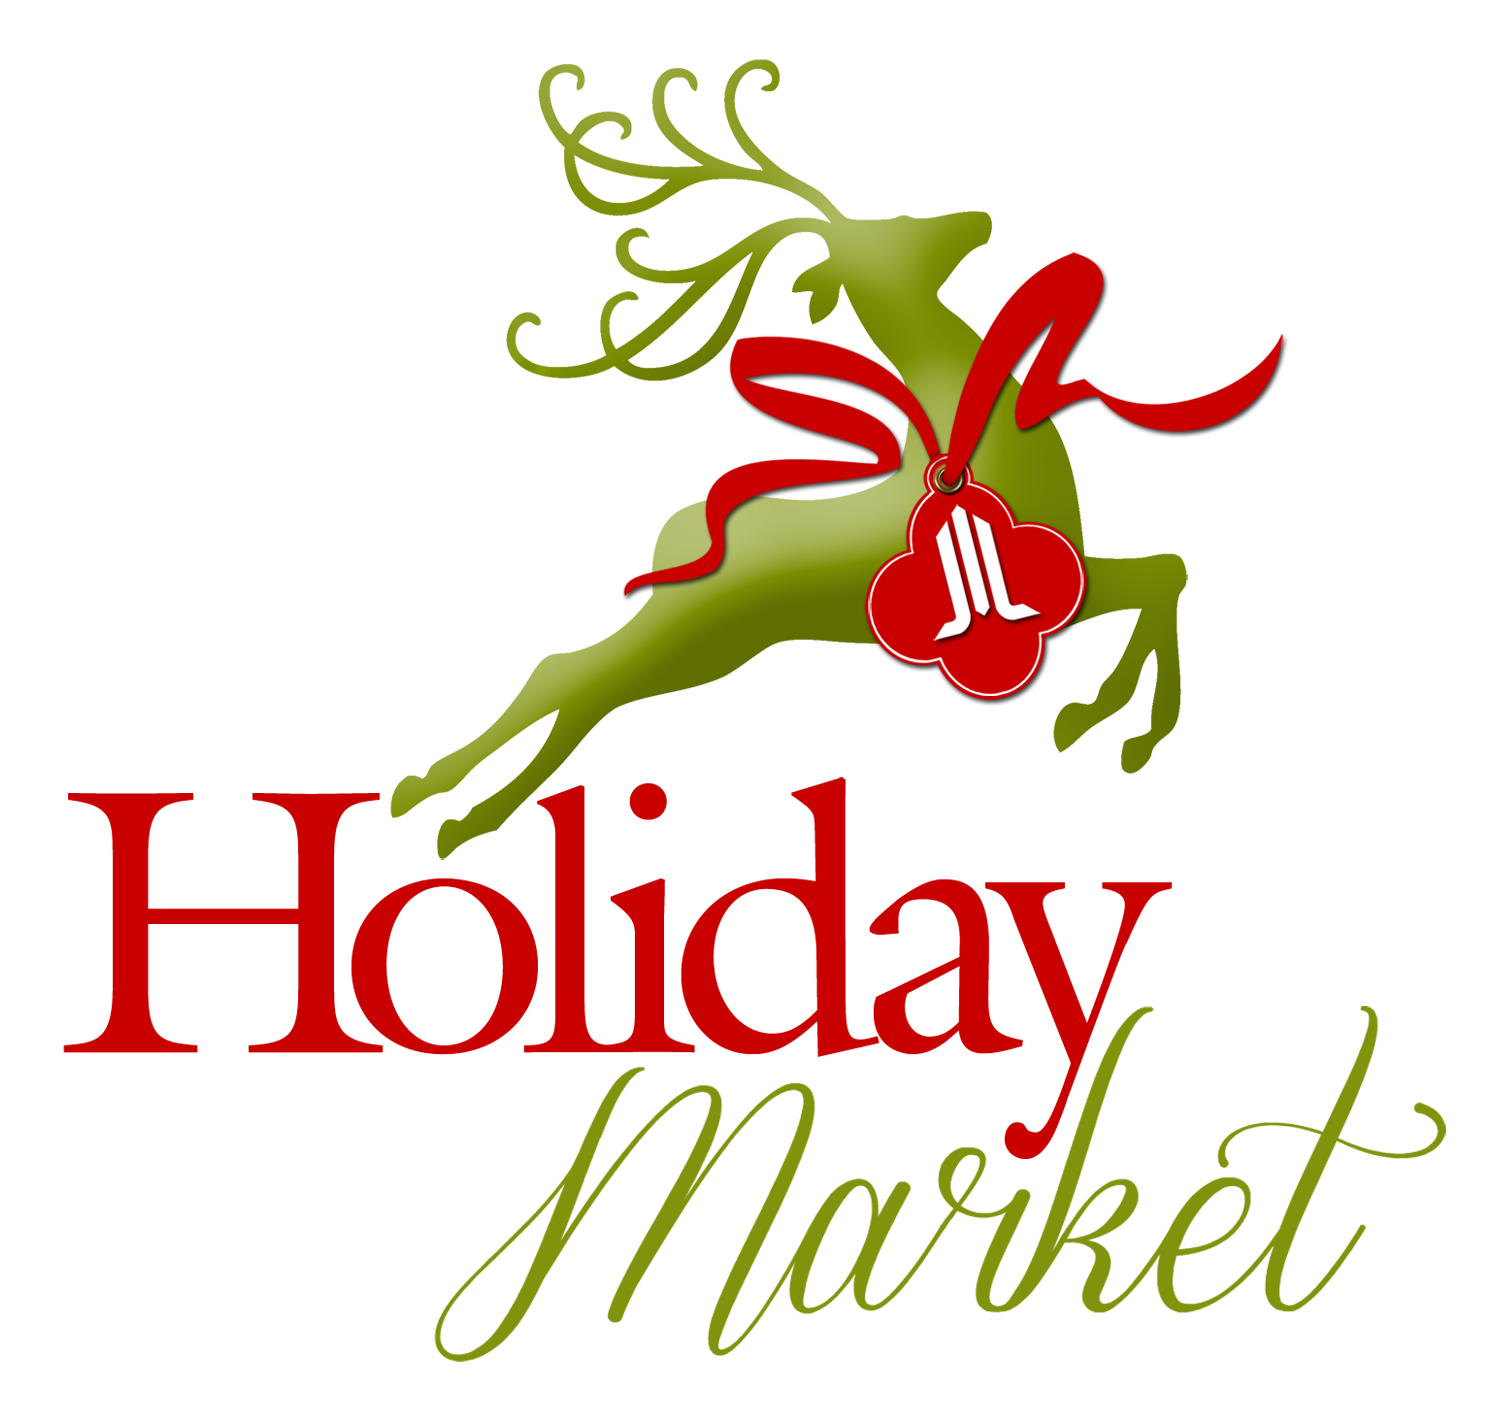 How To Set Up Your Business At A Holiday Market